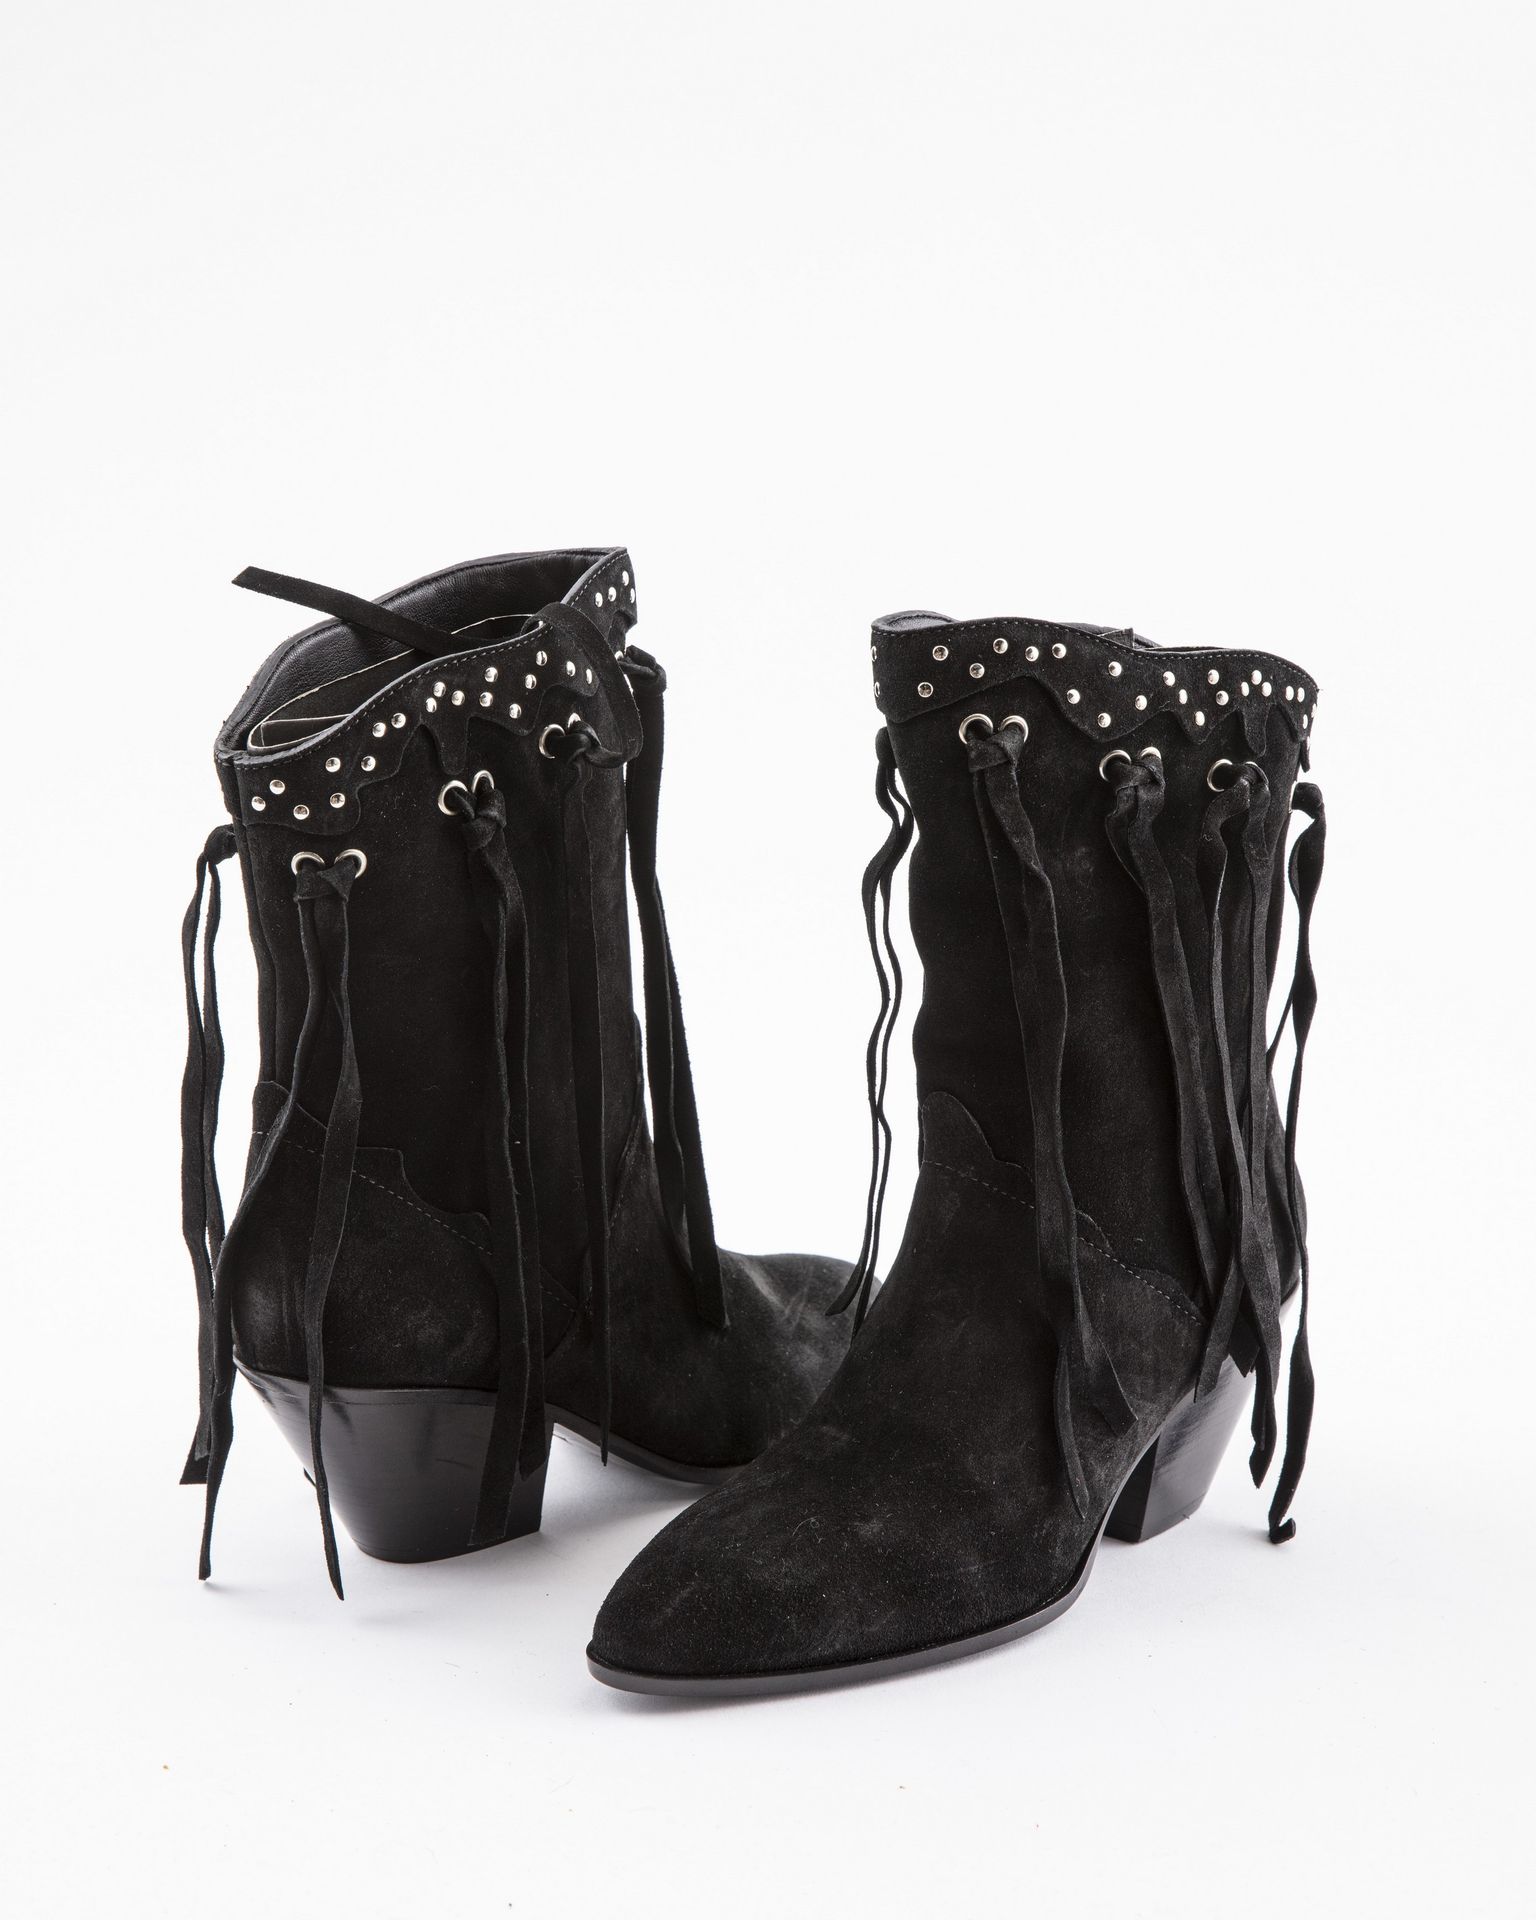 Null GIUSEPPE ZANOTTI: Black suede ankle boots with studs and bangs on the edge,&hellip;